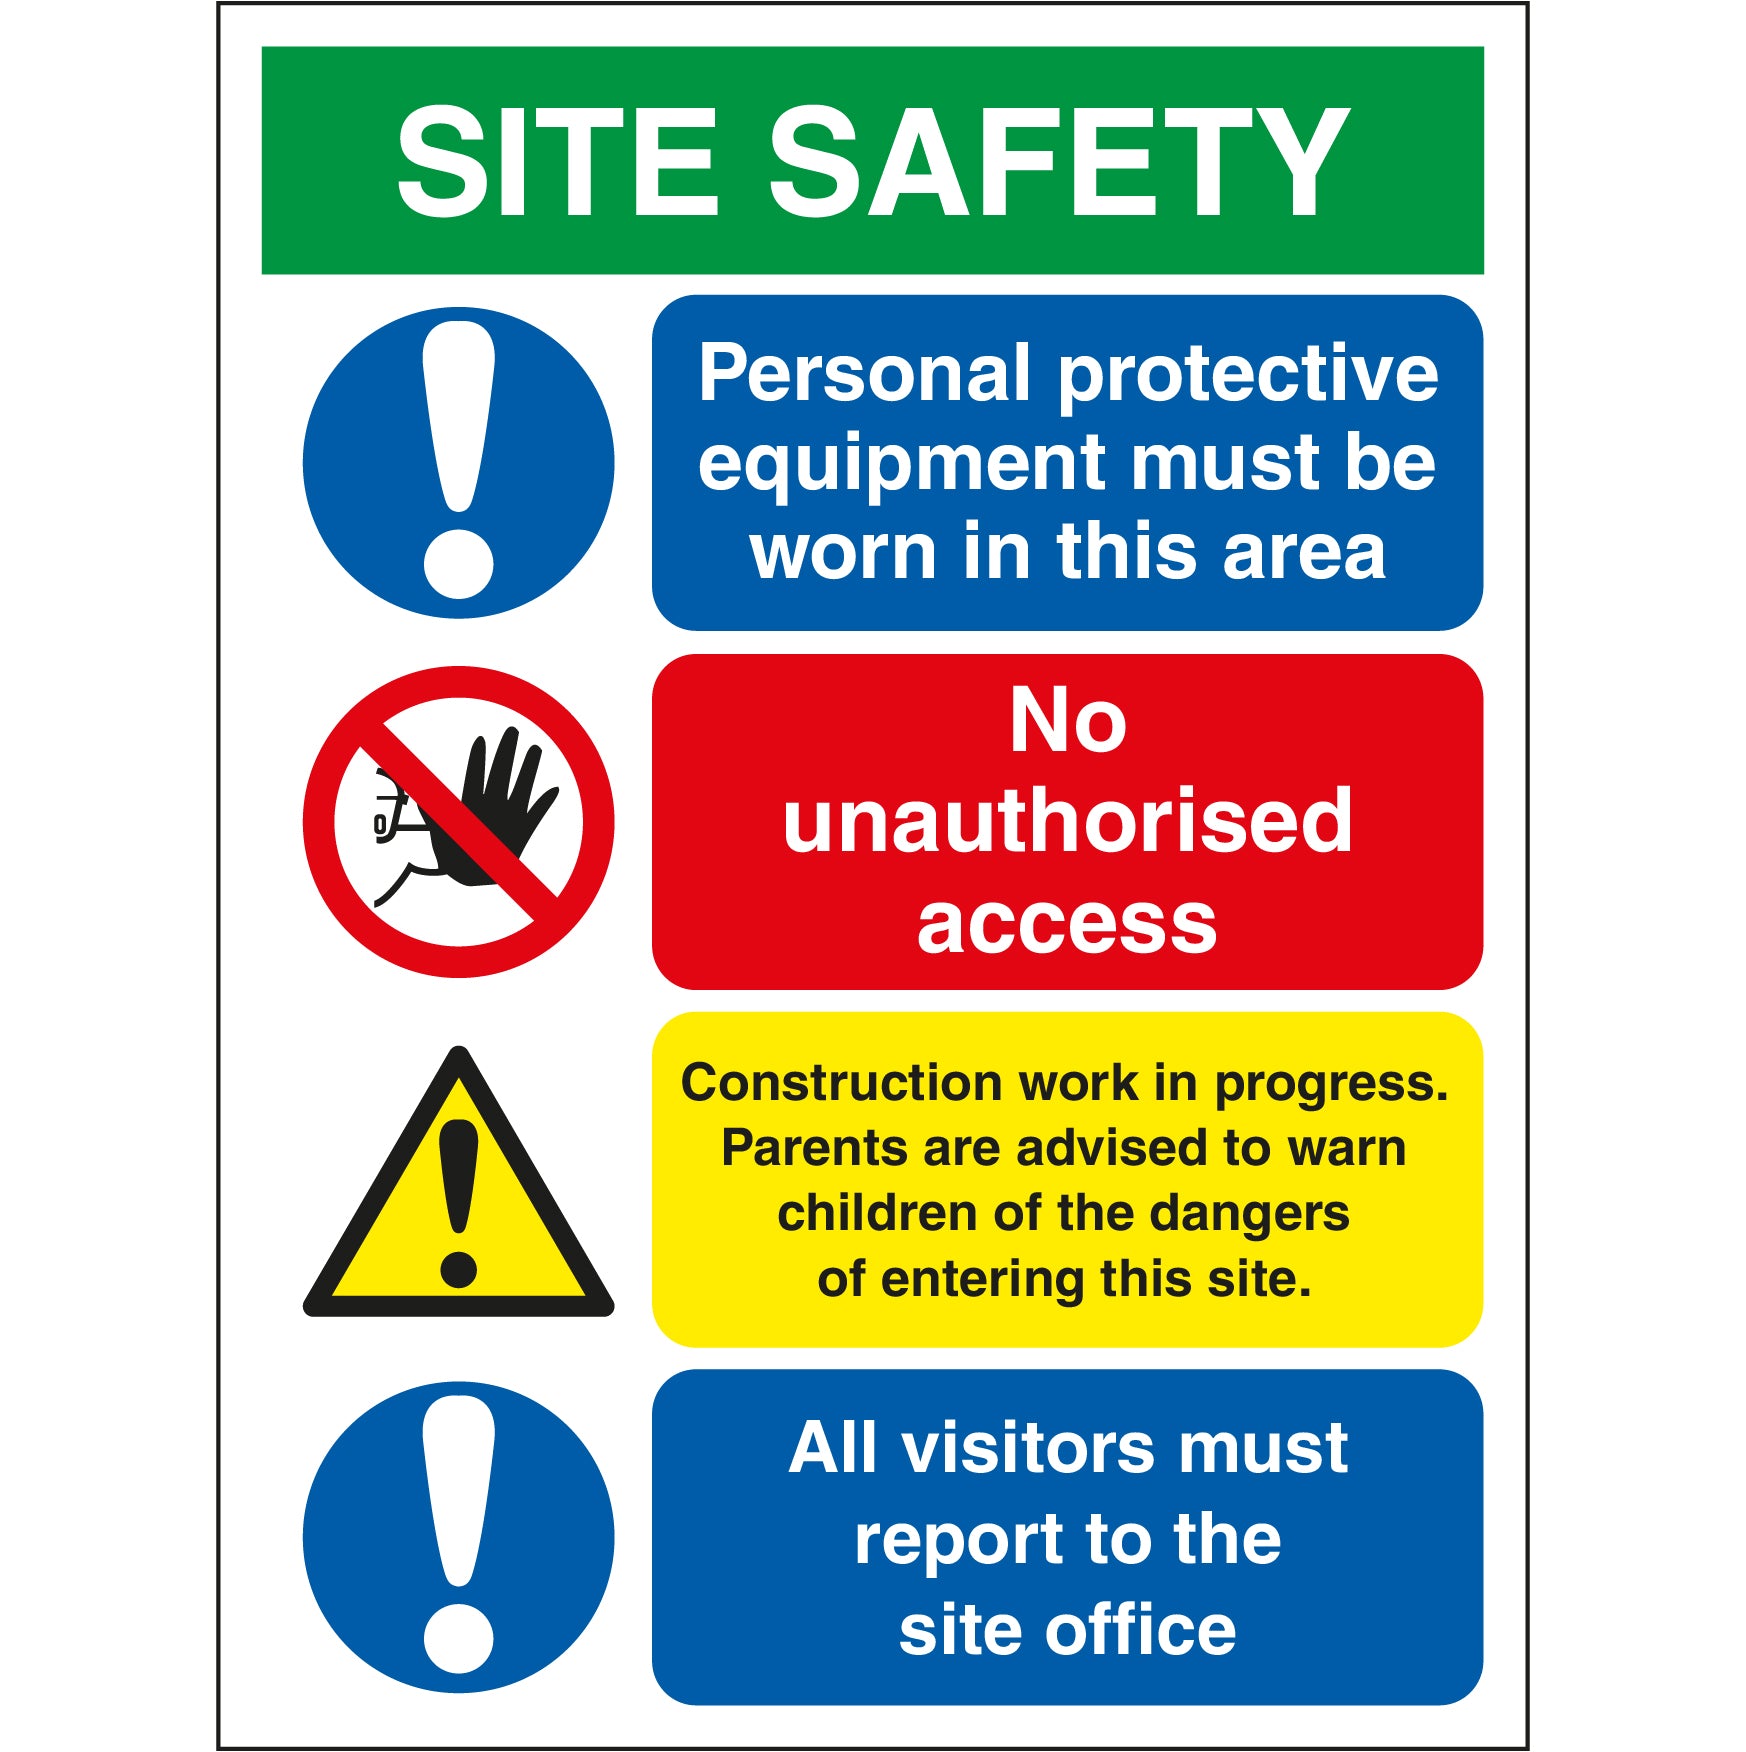 Site Safety Board - PPE, Unauthorised Access, Construction Site, Visit ...